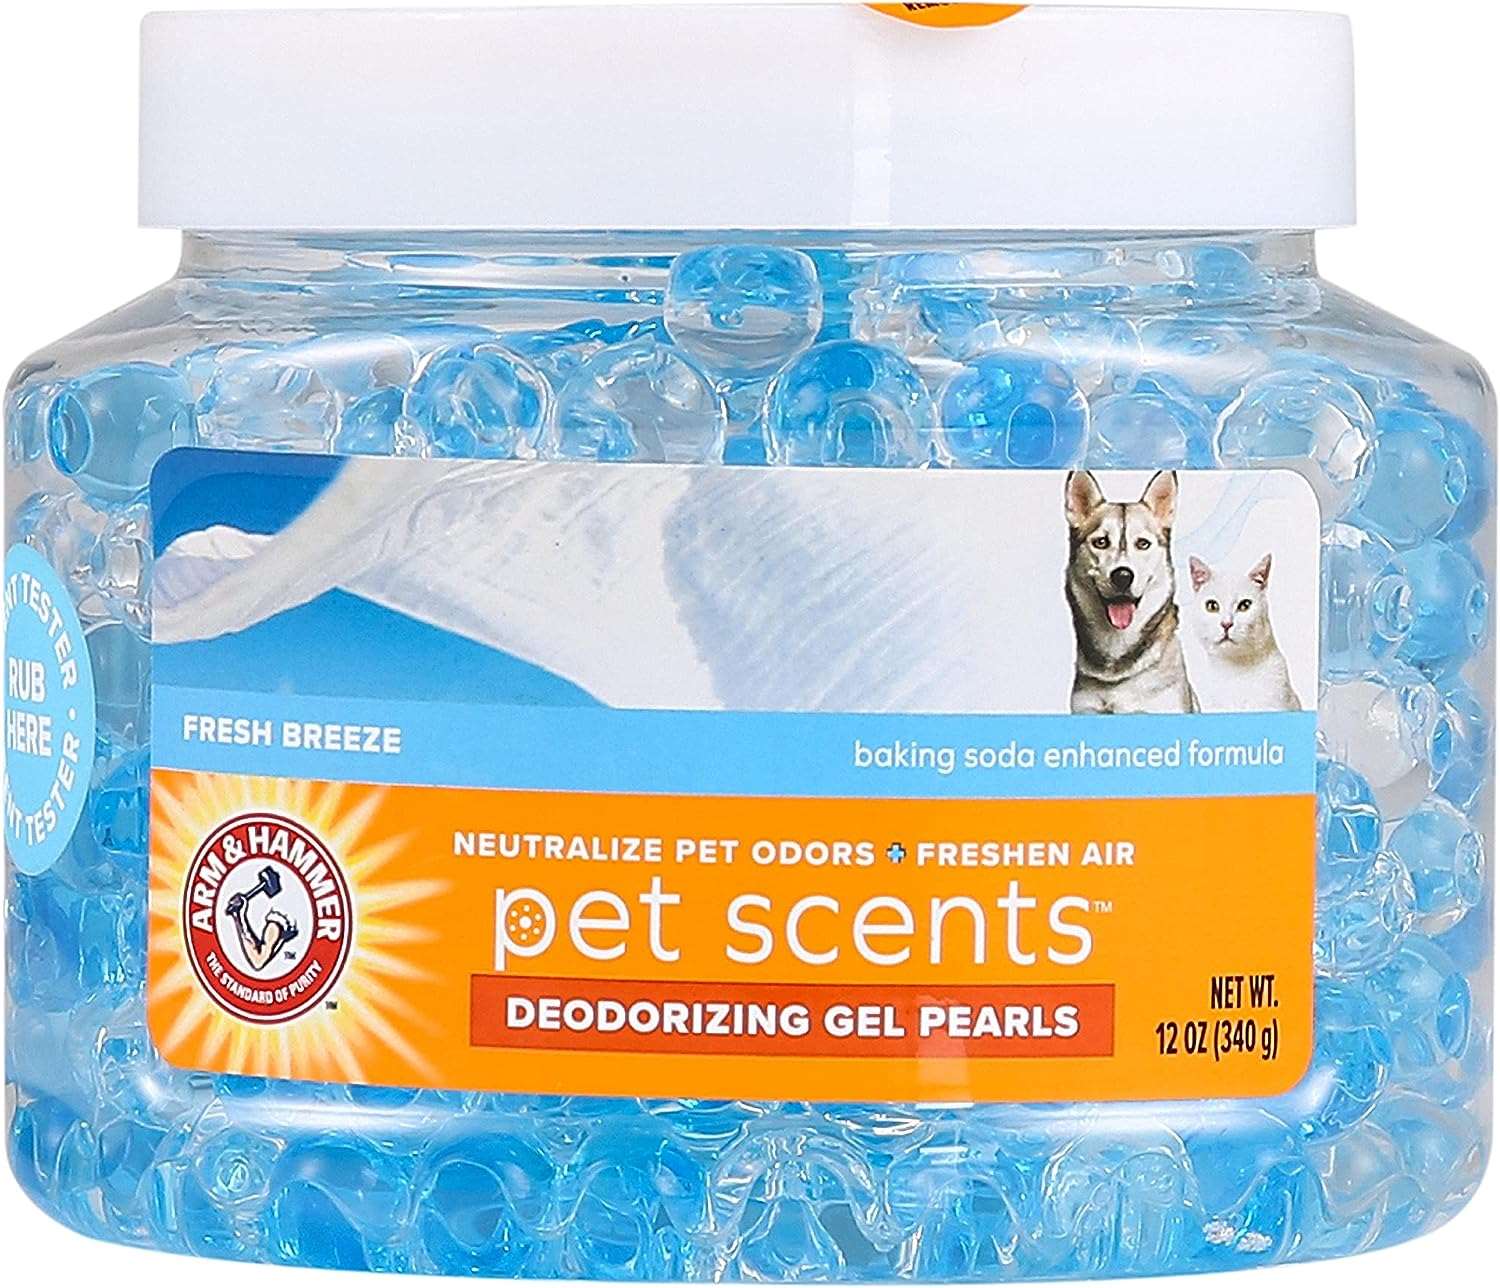 Wholesale prices with free shipping all over United States Arm & Hammer Air Care Pet Scents Deodorizing Gel Beads in Lavender Fields | 12 oz Pet Odor Neutralizing Gel Beads with Baking Soda | Air Freshener Beads for Pet Odor Elimination - Steven Deals